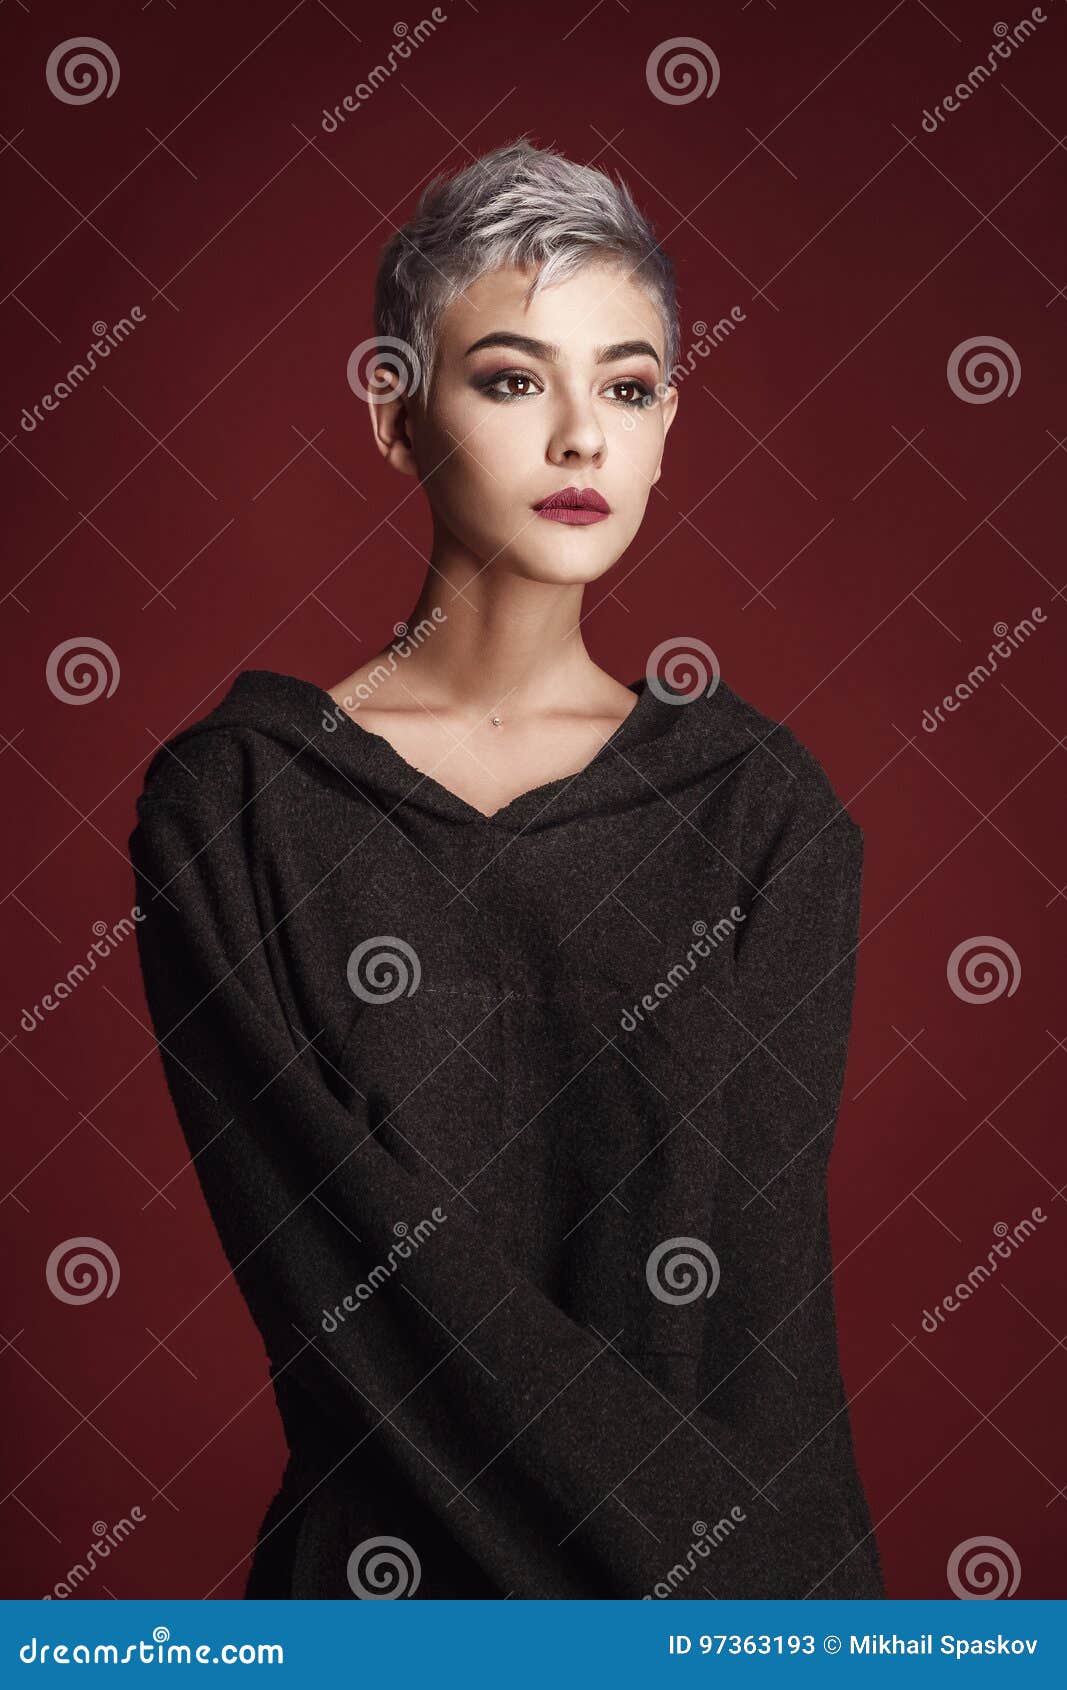 Beautiful Young Woman with Short Grey Hair Stock Image - Image of lady,  headshot: 97363193